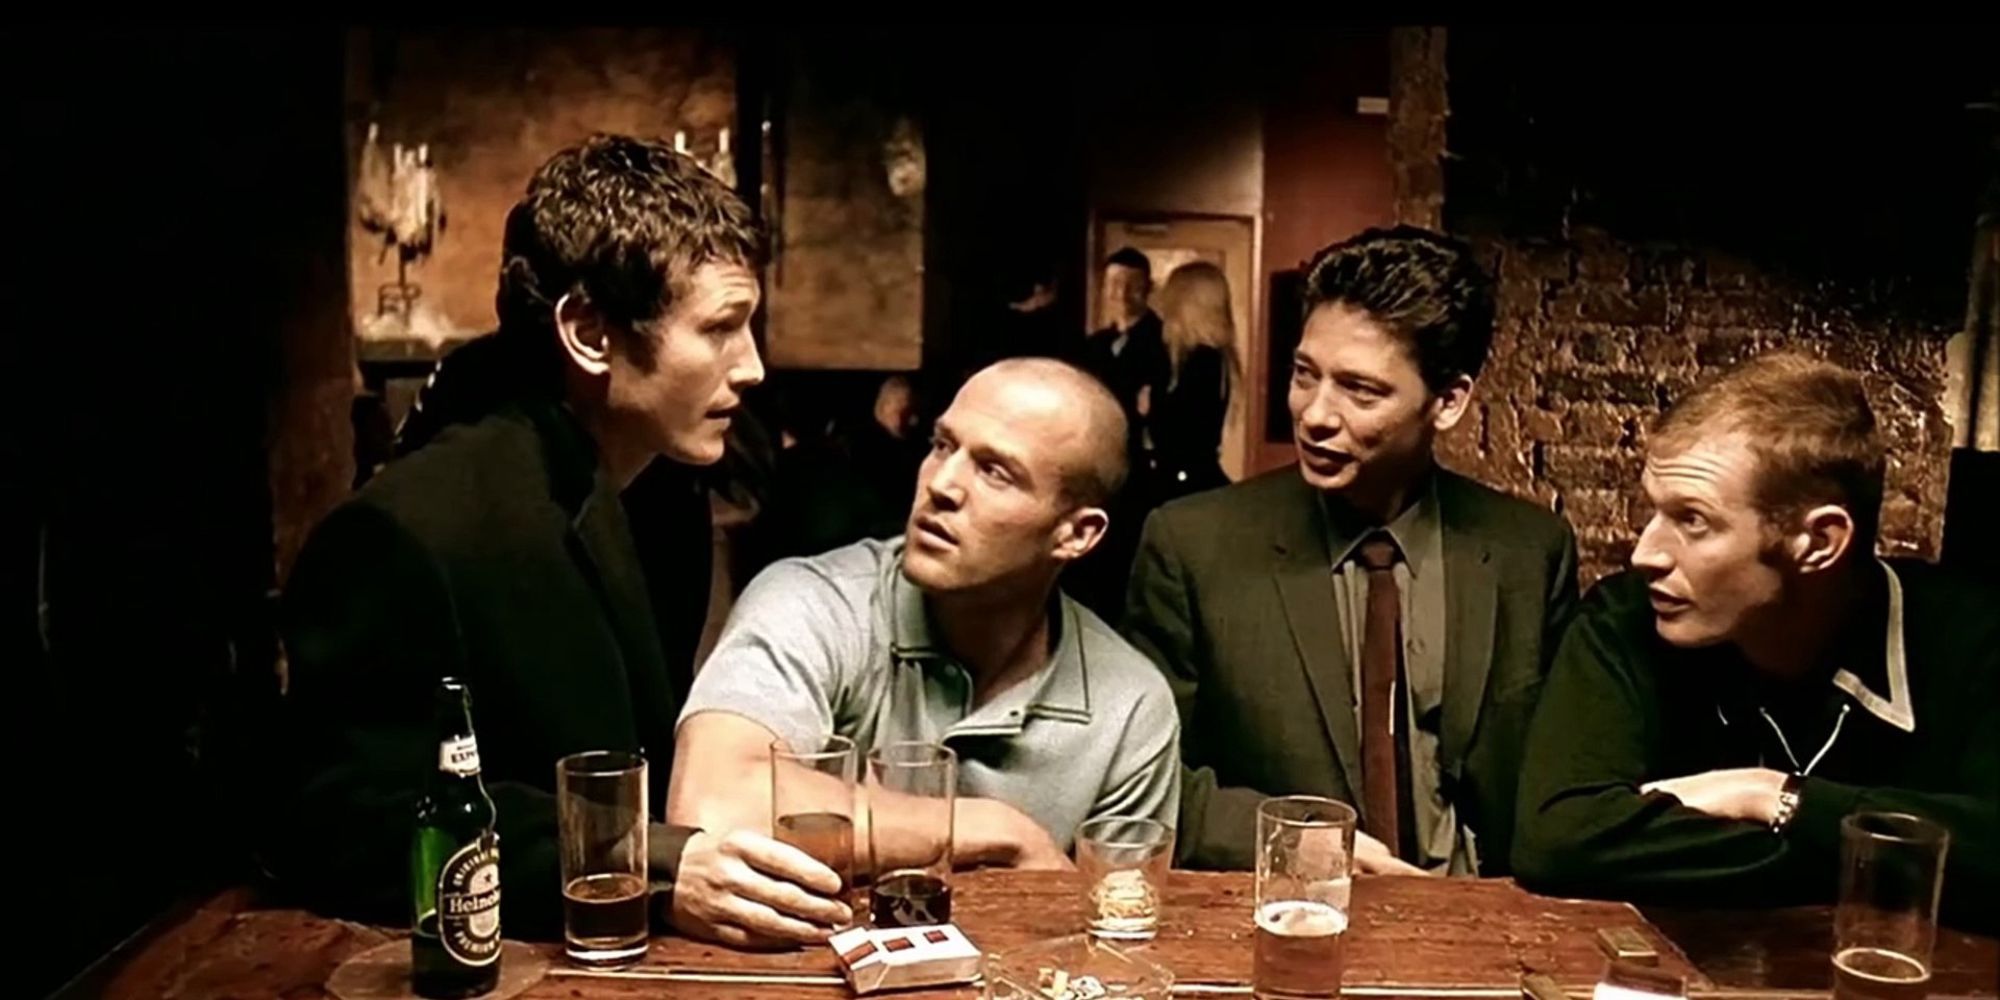 4 men sitting at a bar talking to each other